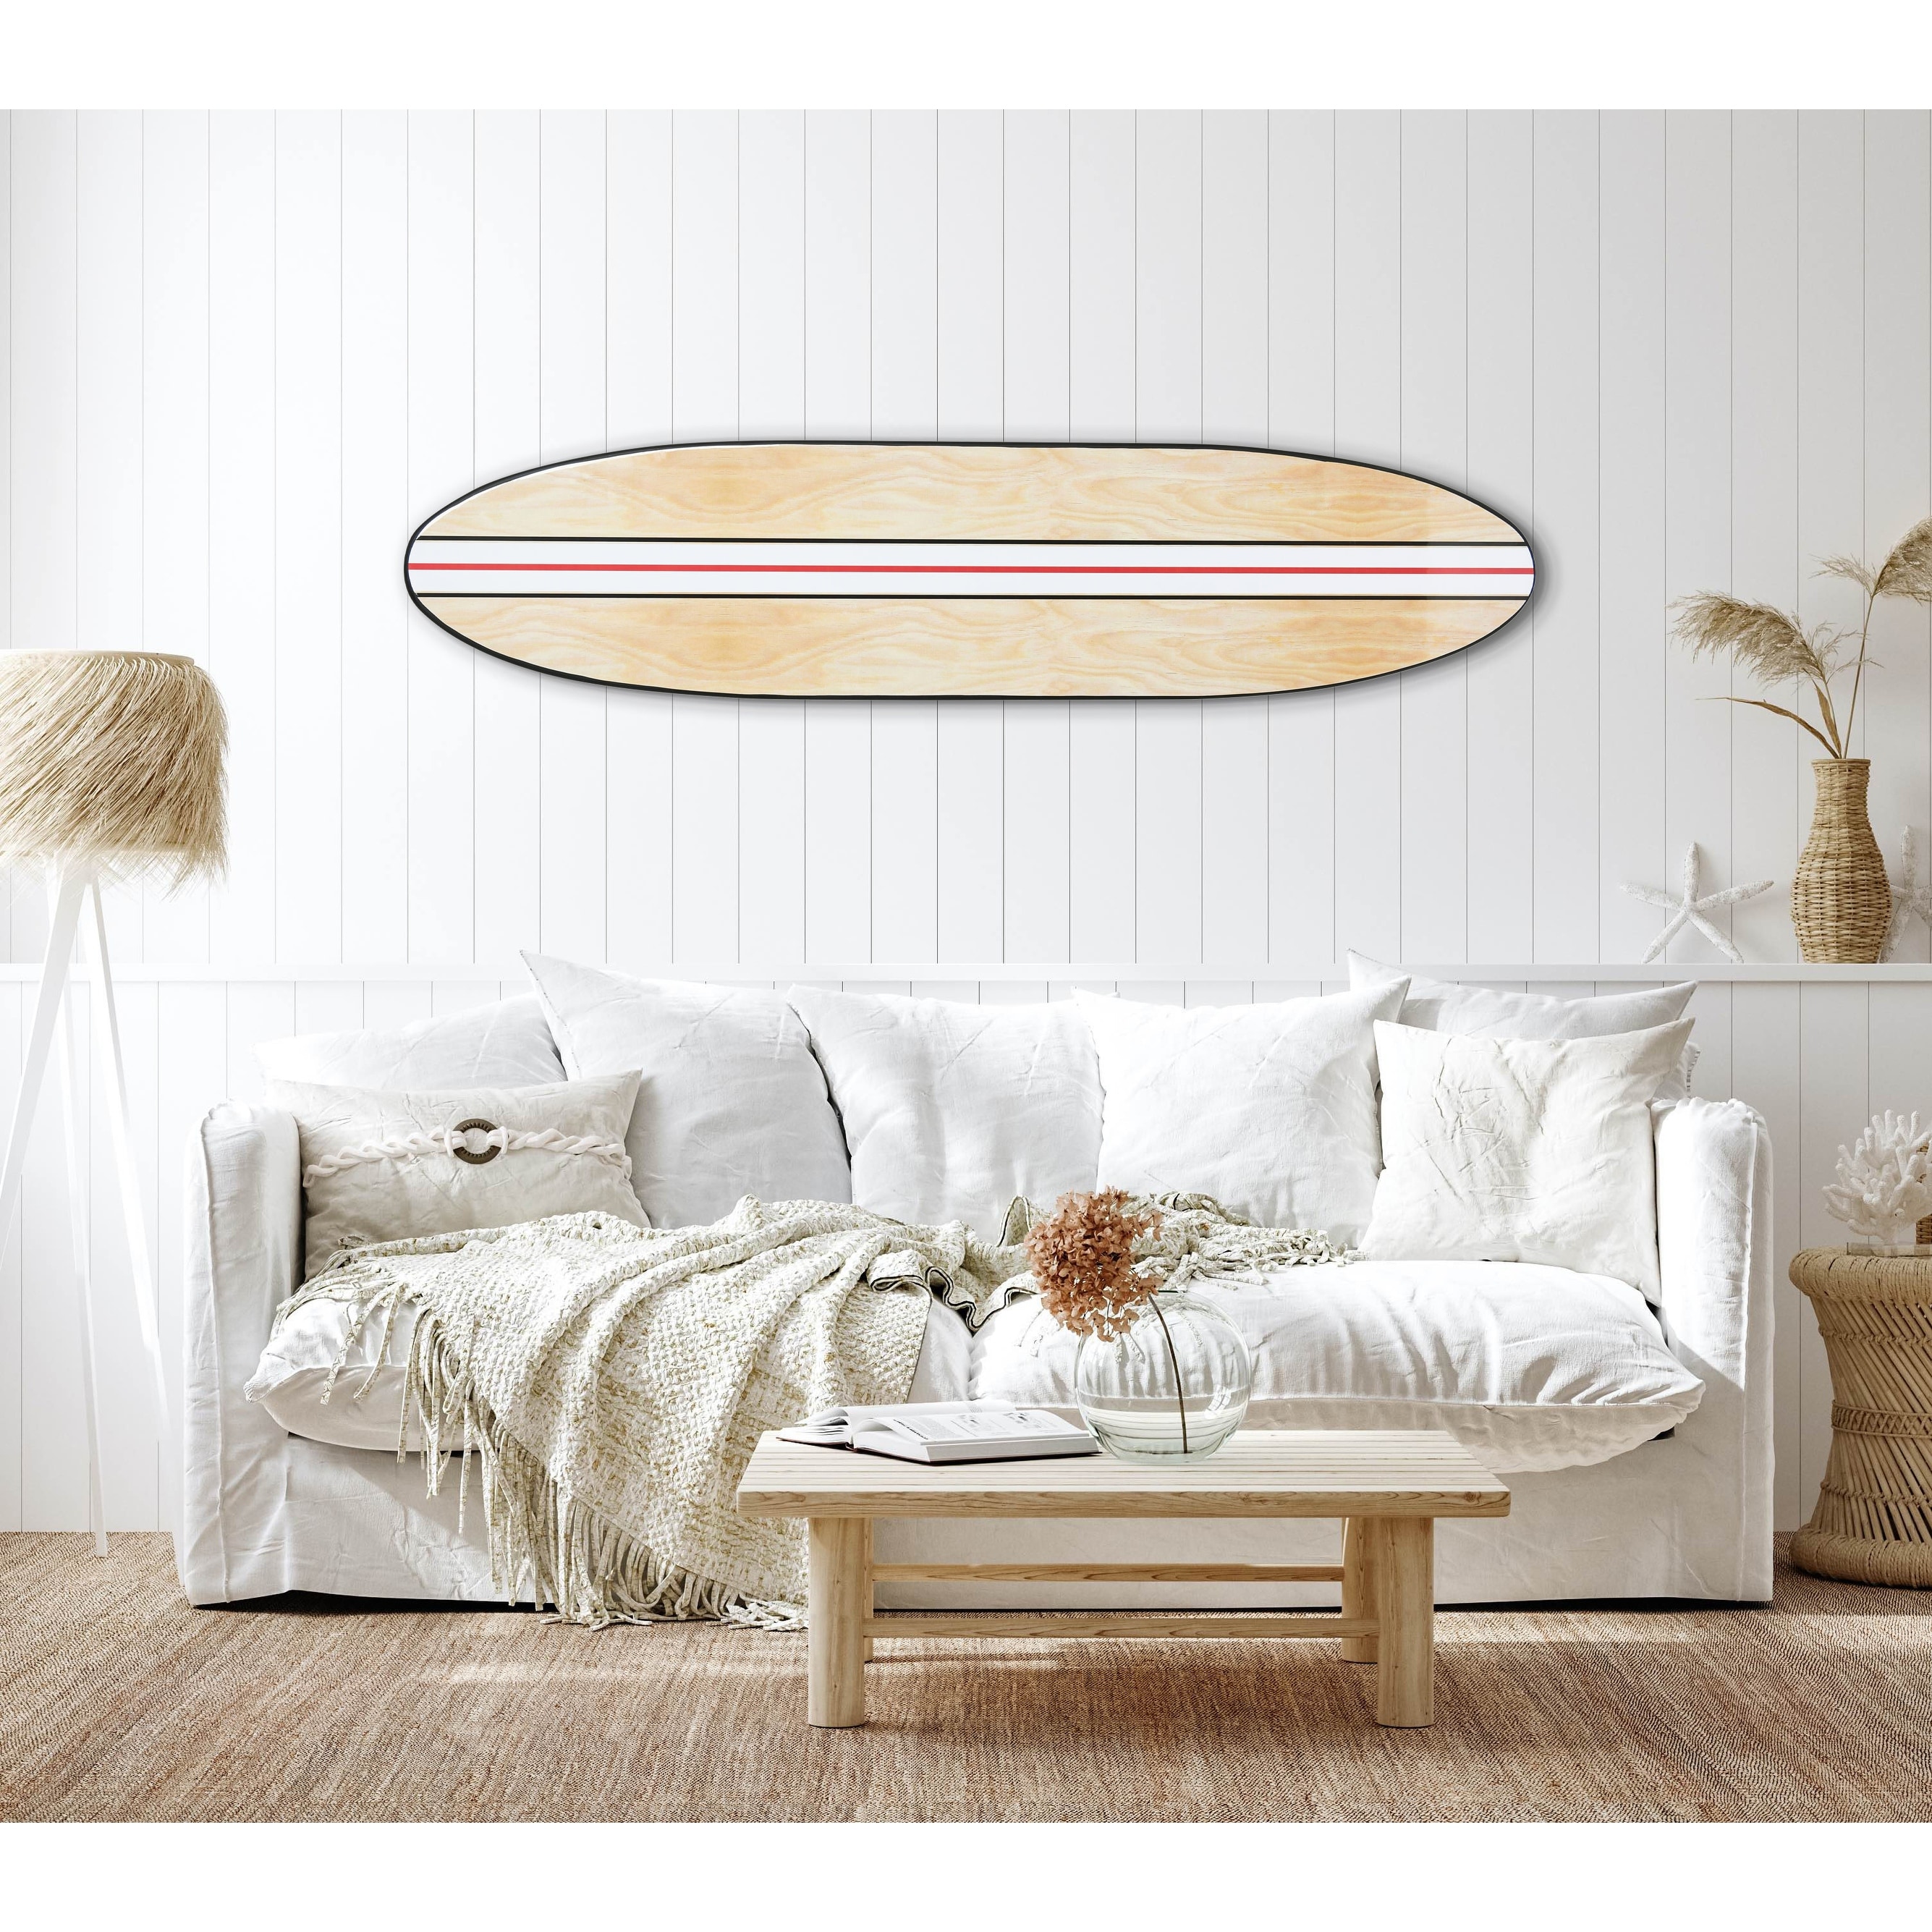 Lacquered Wood Surfboard Wall Dundefinedcor (Hangs Vertical or Horizontal)  On Sale Bed Bath  Beyond 34865086